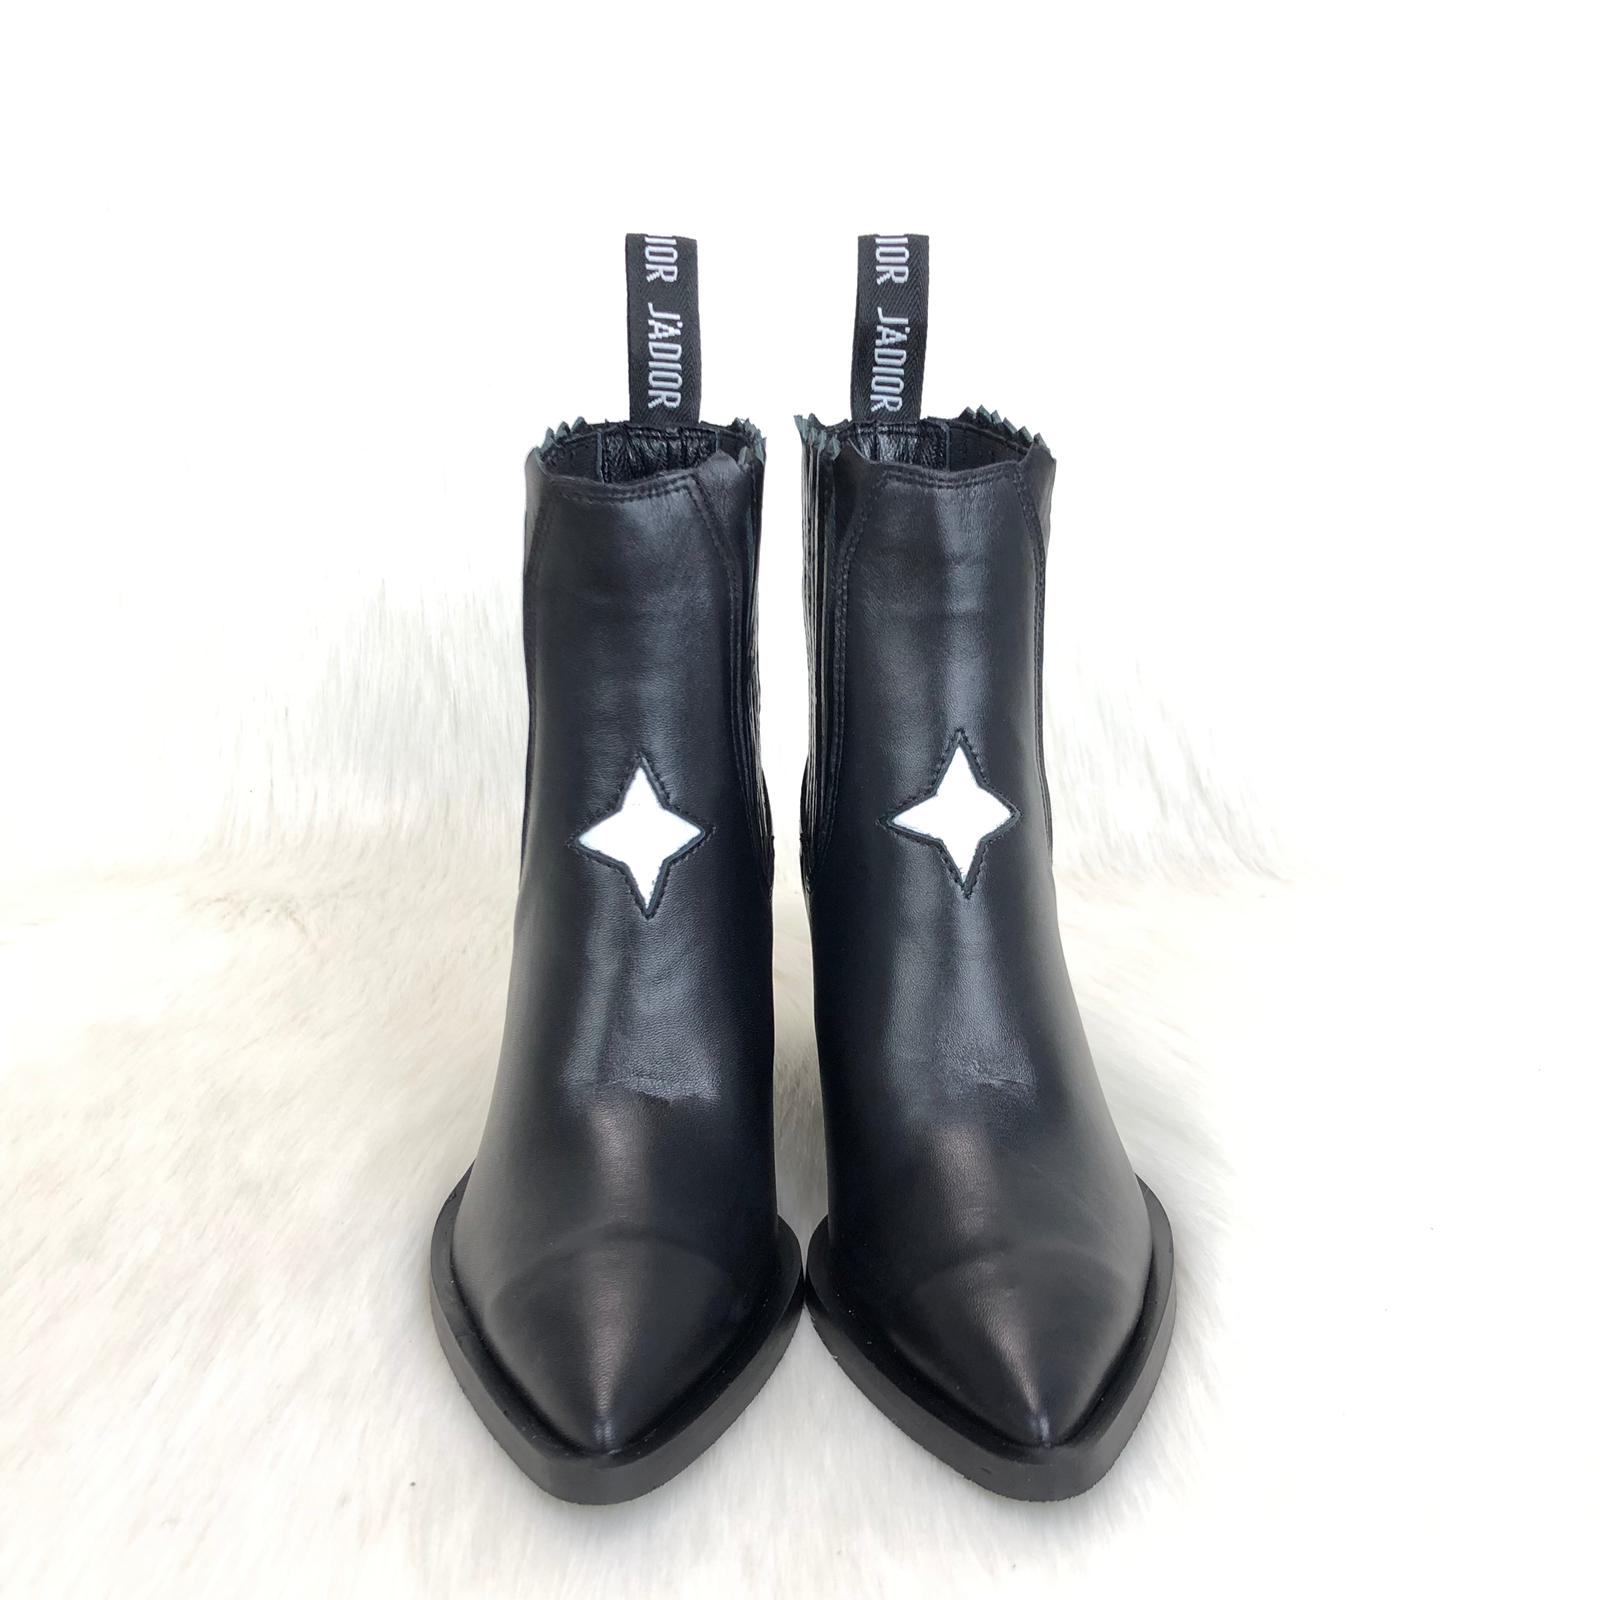 dior boots with star, OFF 75%,www 